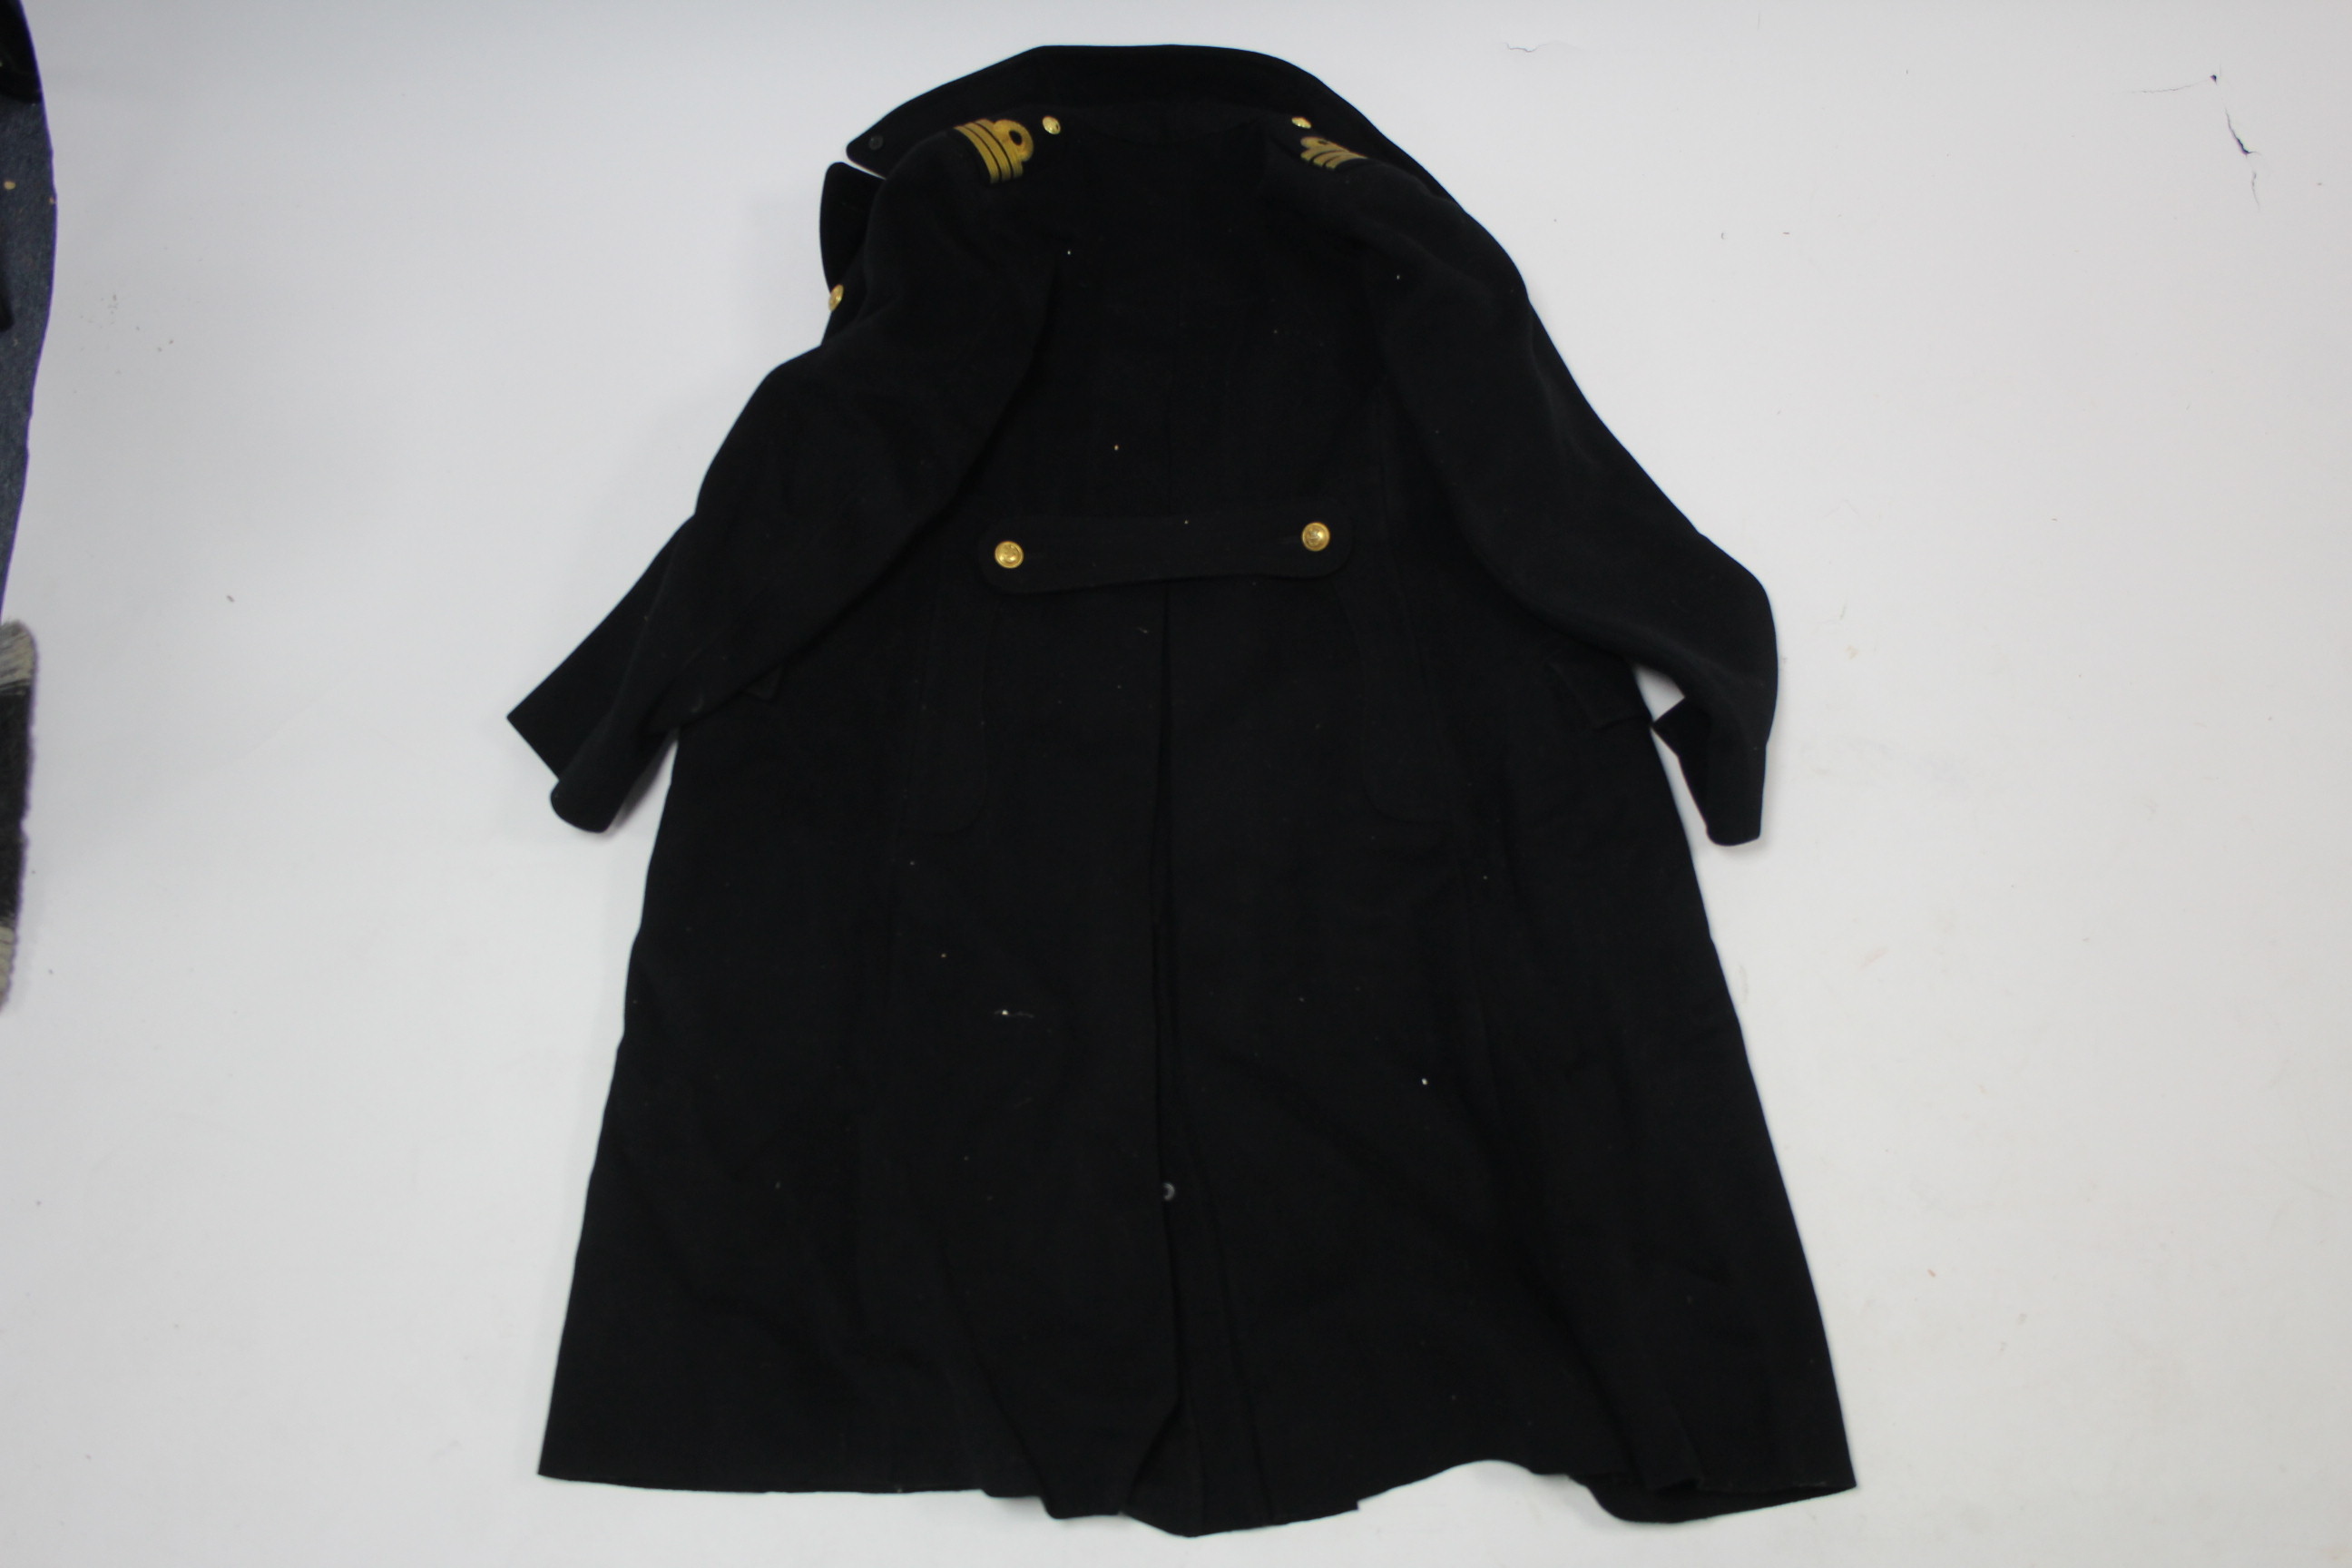 A British Royal Navy commander’s overcoat. - Image 6 of 6